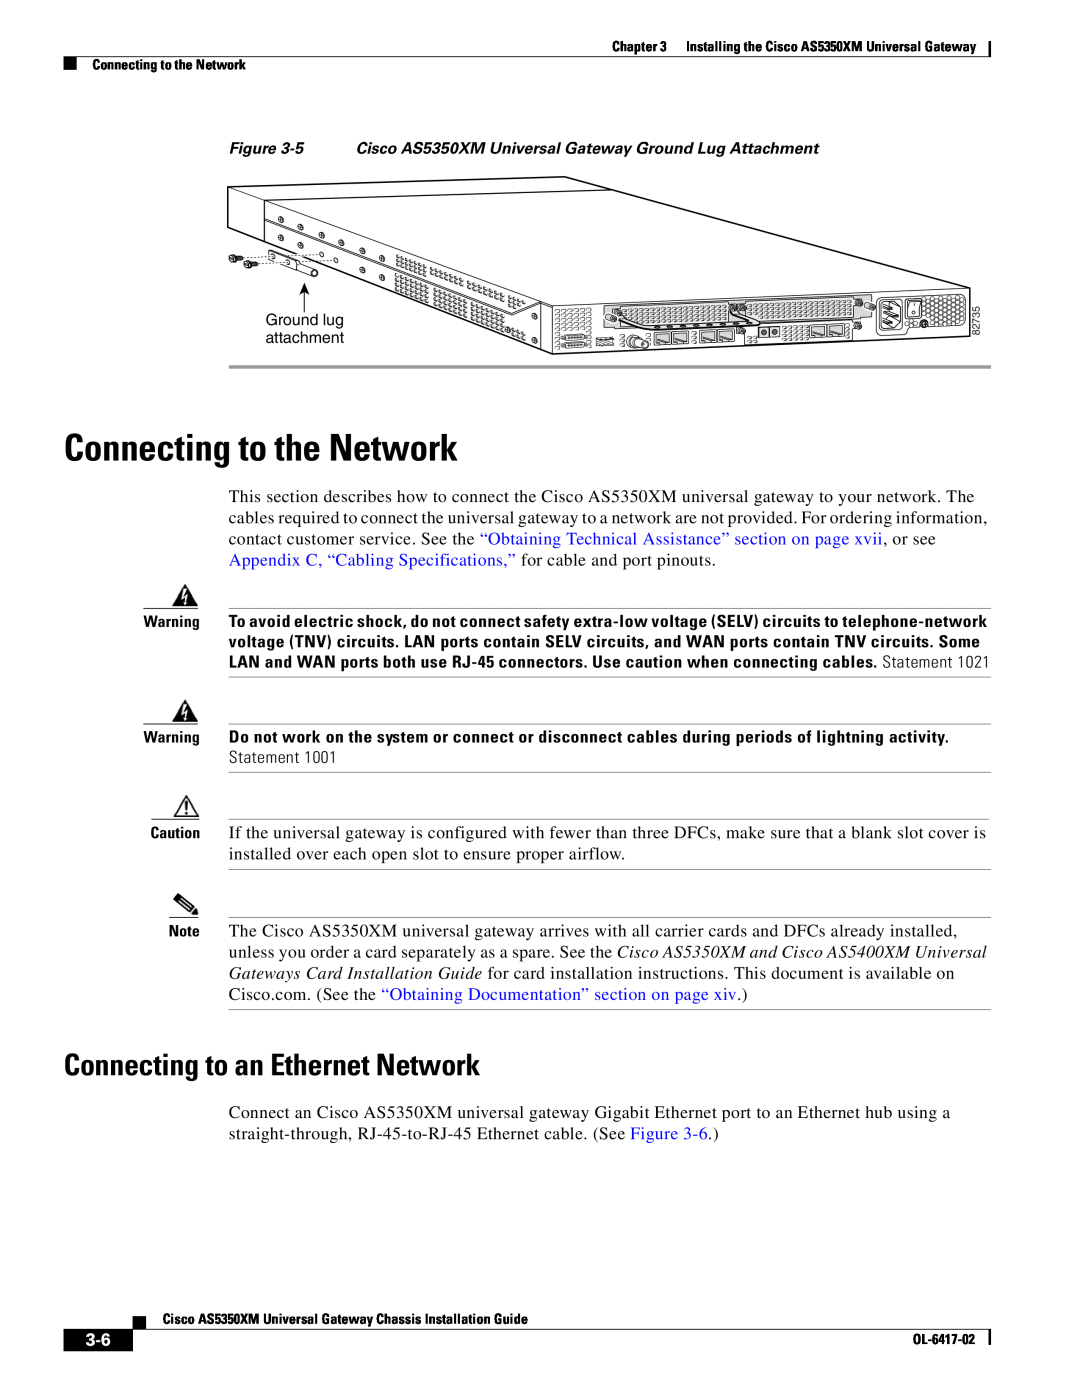 Cisco Systems AS5350XM manual Connecting to the Network, Connecting to an Ethernet Network 